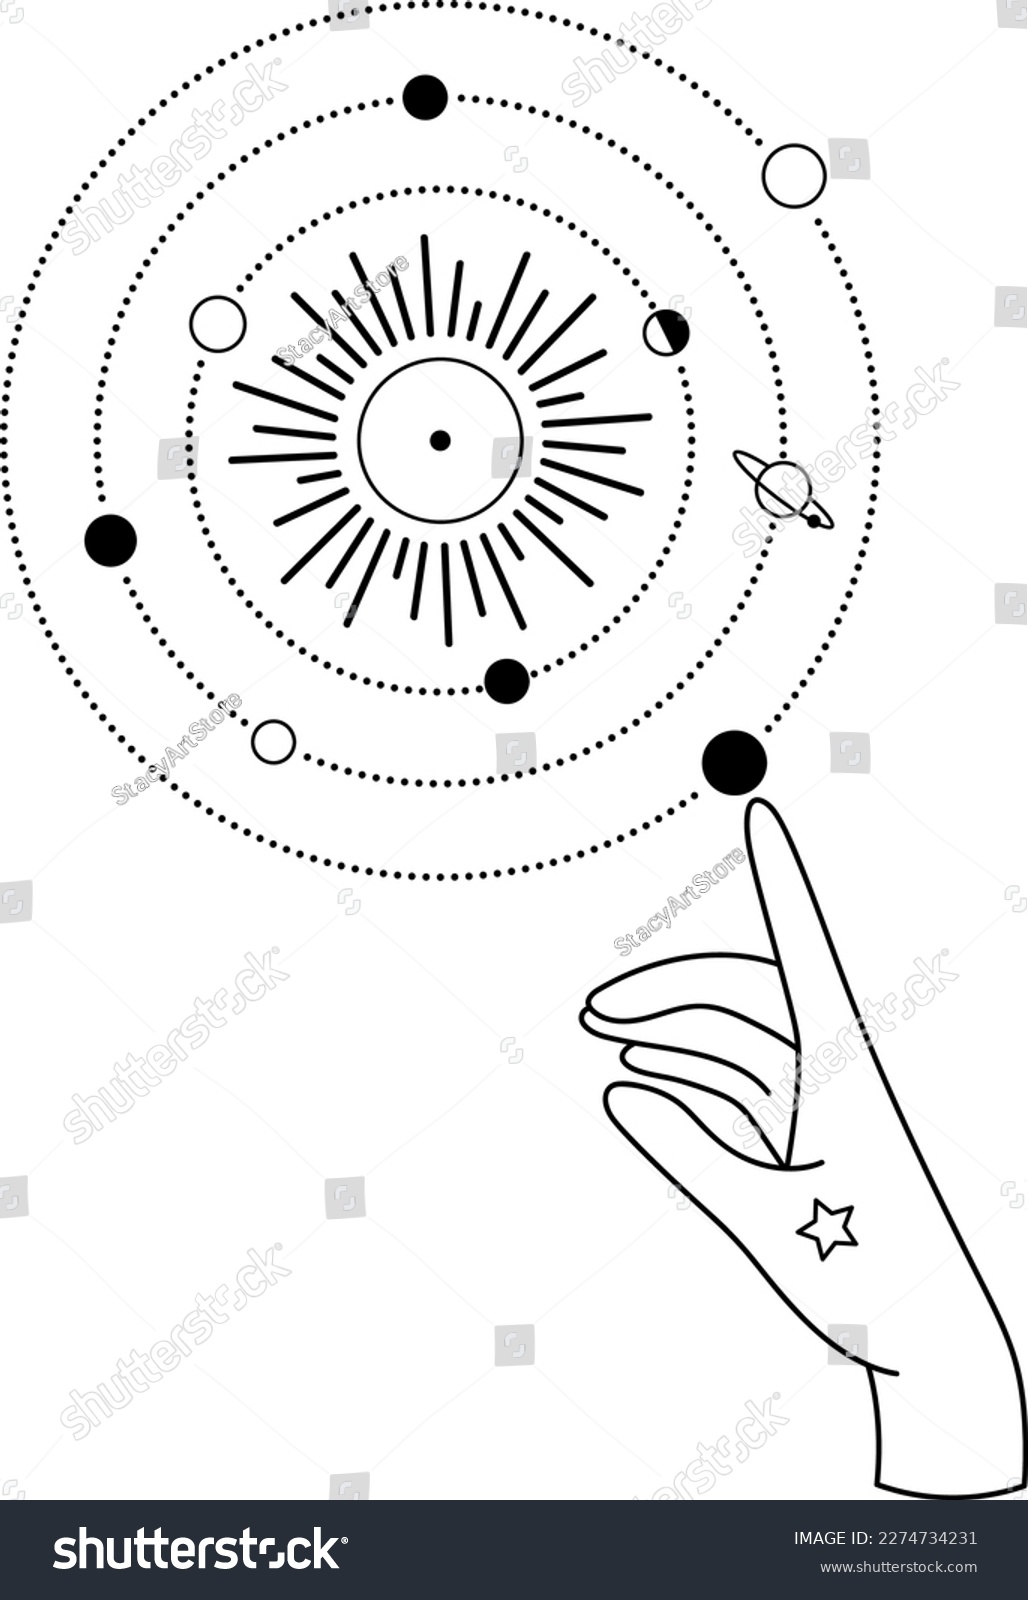 SVG of Bohemian Universe Illustration with Moon Phases, Sun, Stars and Rays. Astrology SVG Vector Clipart. Celestial, Mystical, Esoteric designs perfect for Printing. T-shirt, Mugs Cut File. Universe Art svg